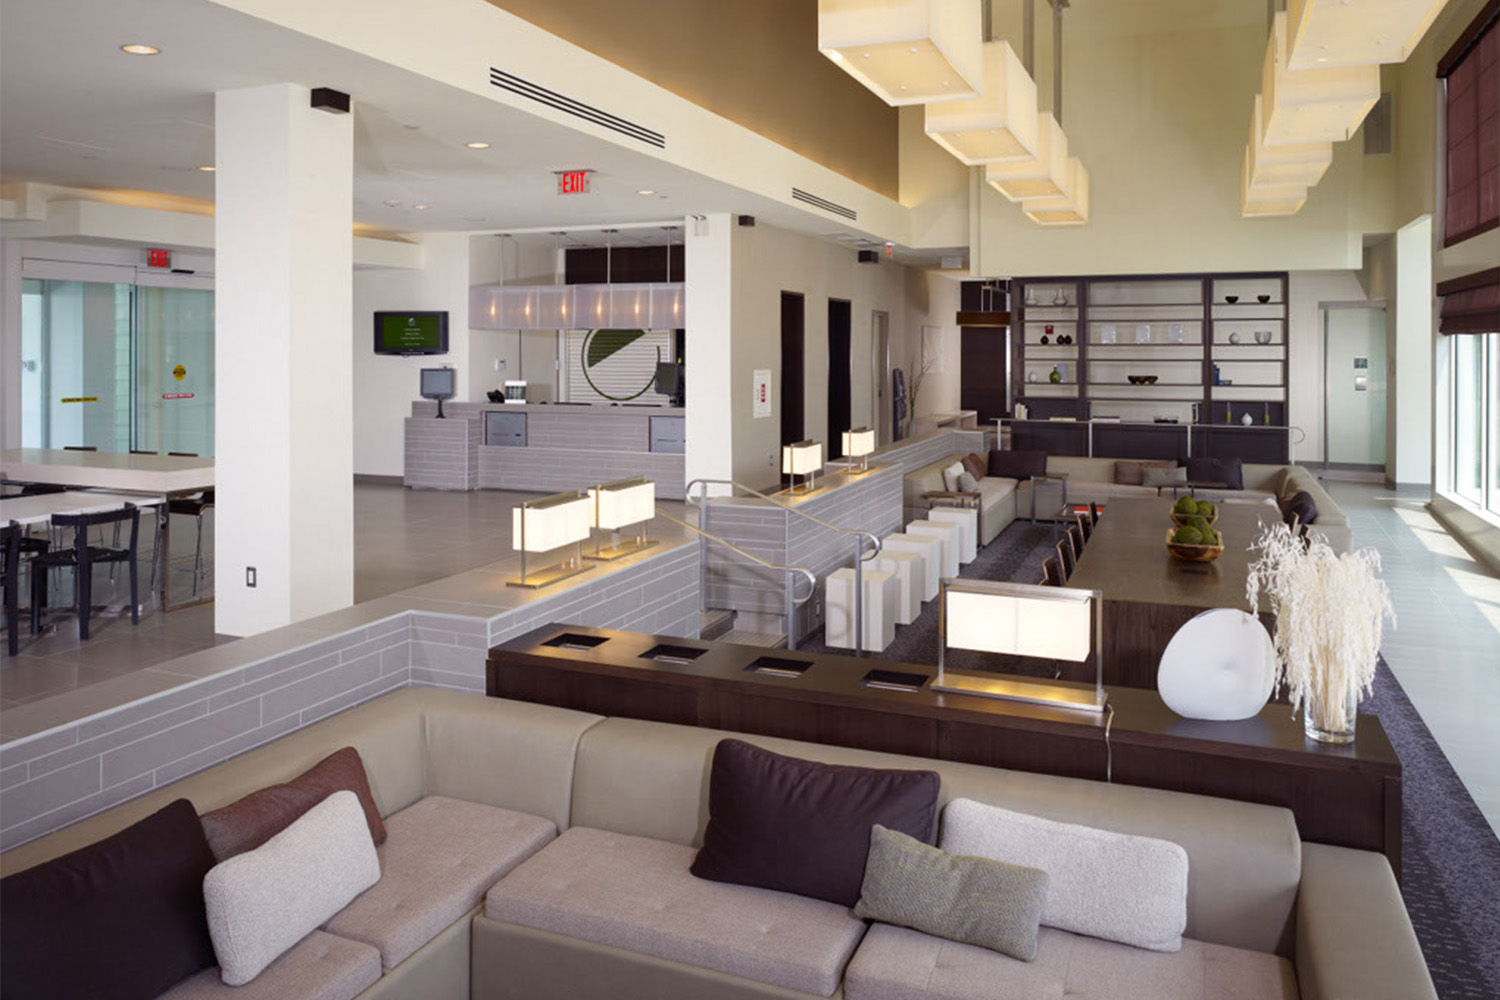 Lobby with tan couches and, rectangular light fixtures, and large windows 